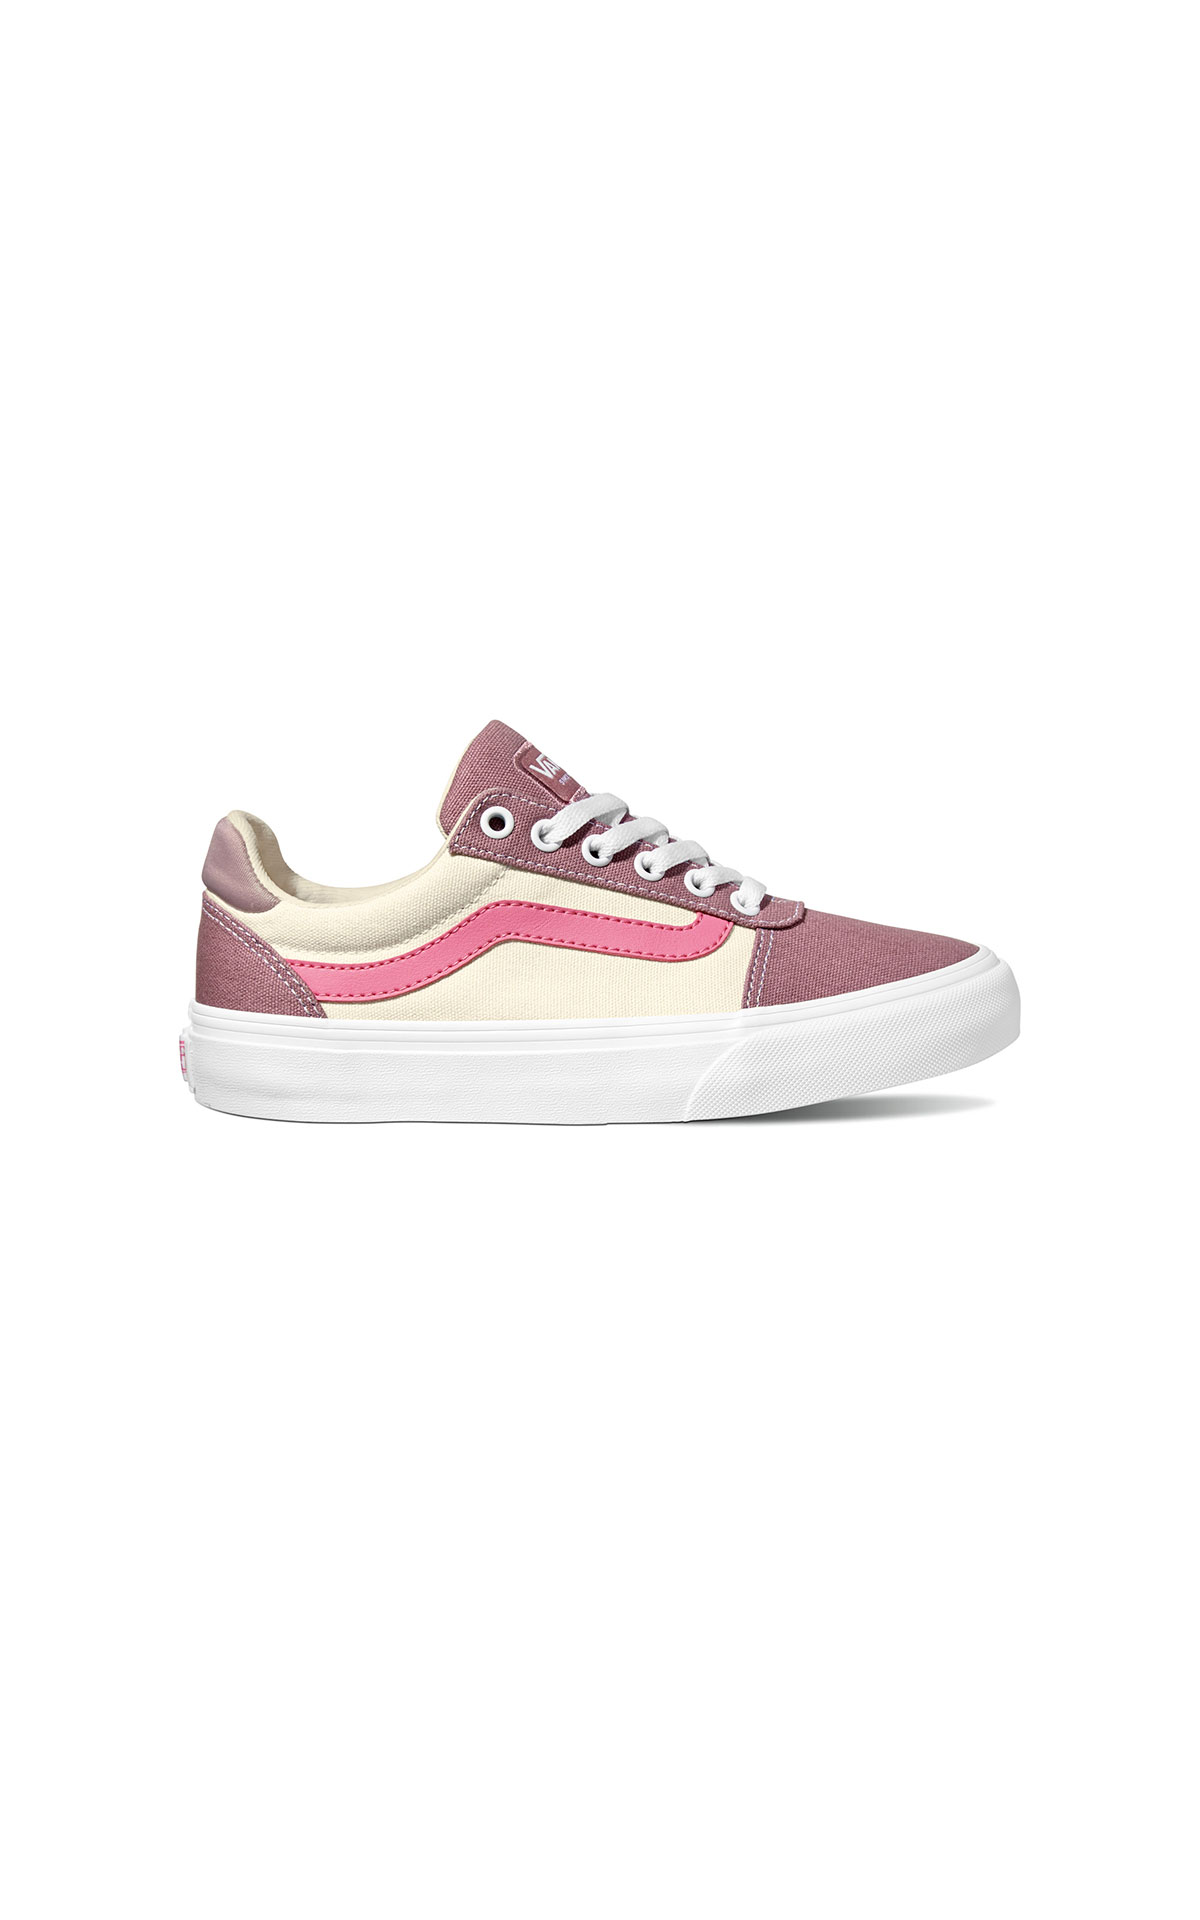 Cream and pink vans shoes